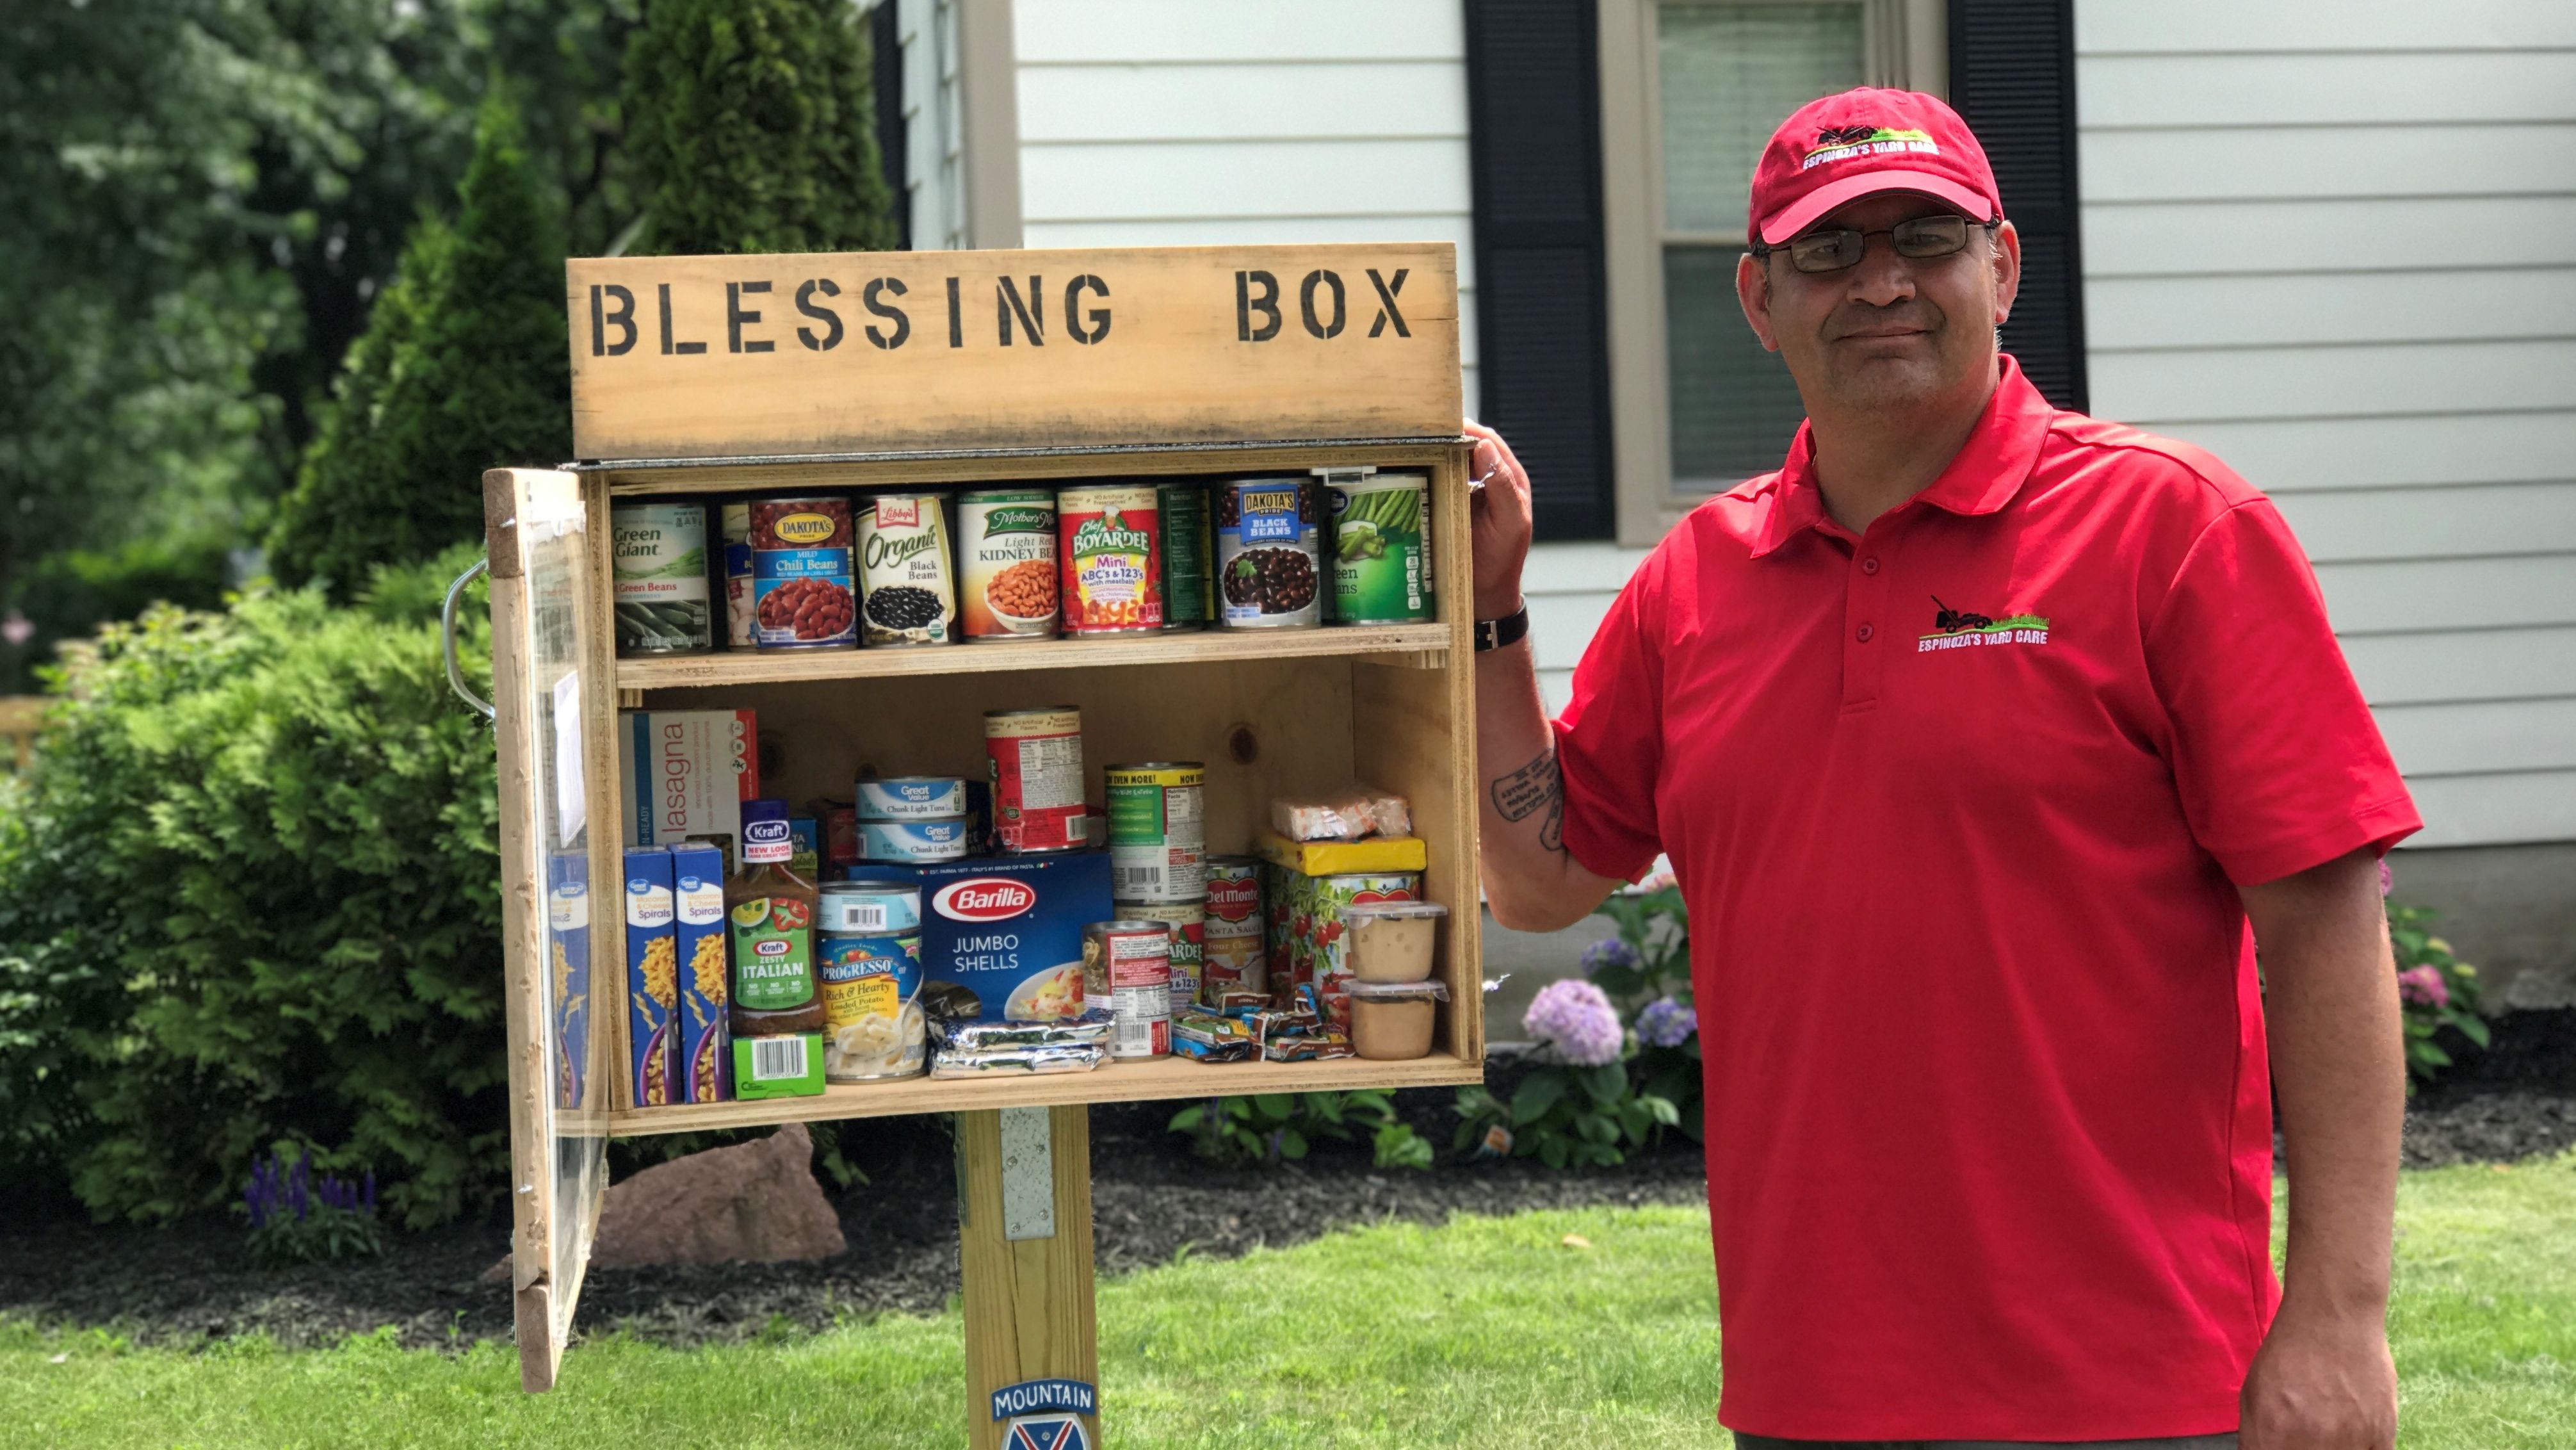 Roman Espinoza stands beside his "Blessing Box," which allows residents of Watertown, New York, to donate and take food as needed. 